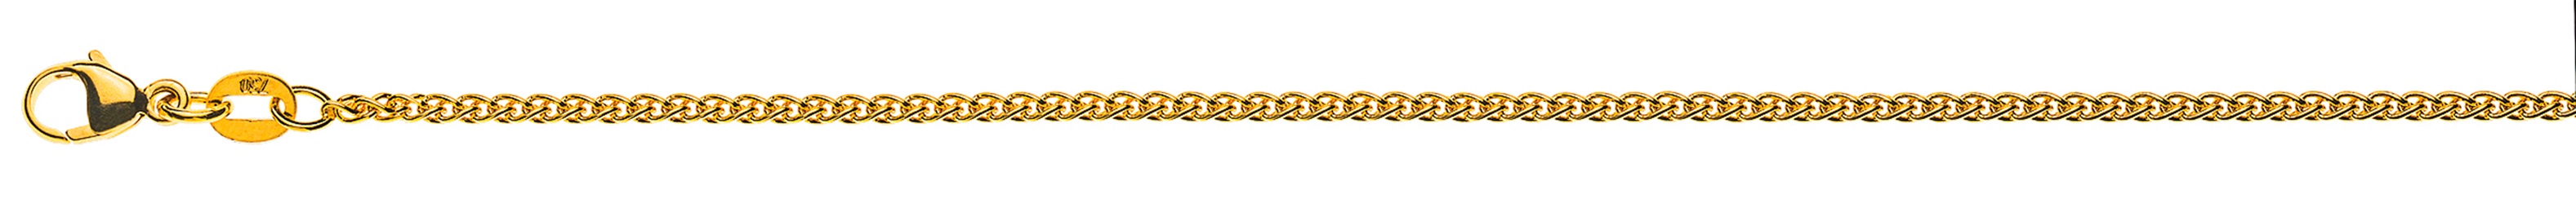 AURONOS Style Necklace yellow gold 9K cable chain 50cm 1.65mm